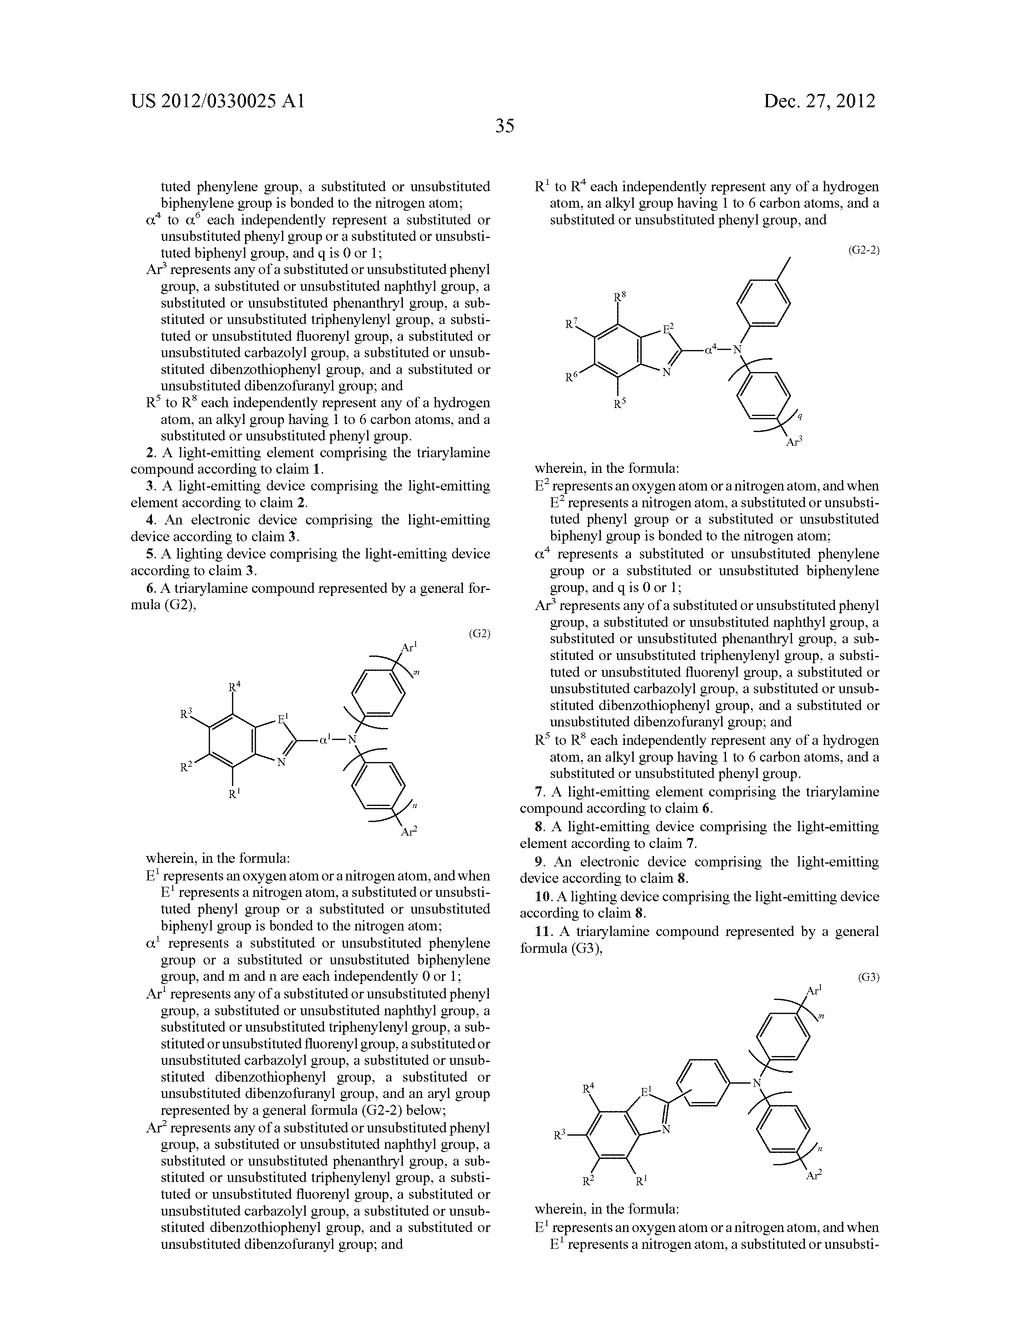 Triarylamine Compound, Light-Emitting Element, Light-Emitting Device,     Electronic Device, and Lighting Device - diagram, schematic, and image 59